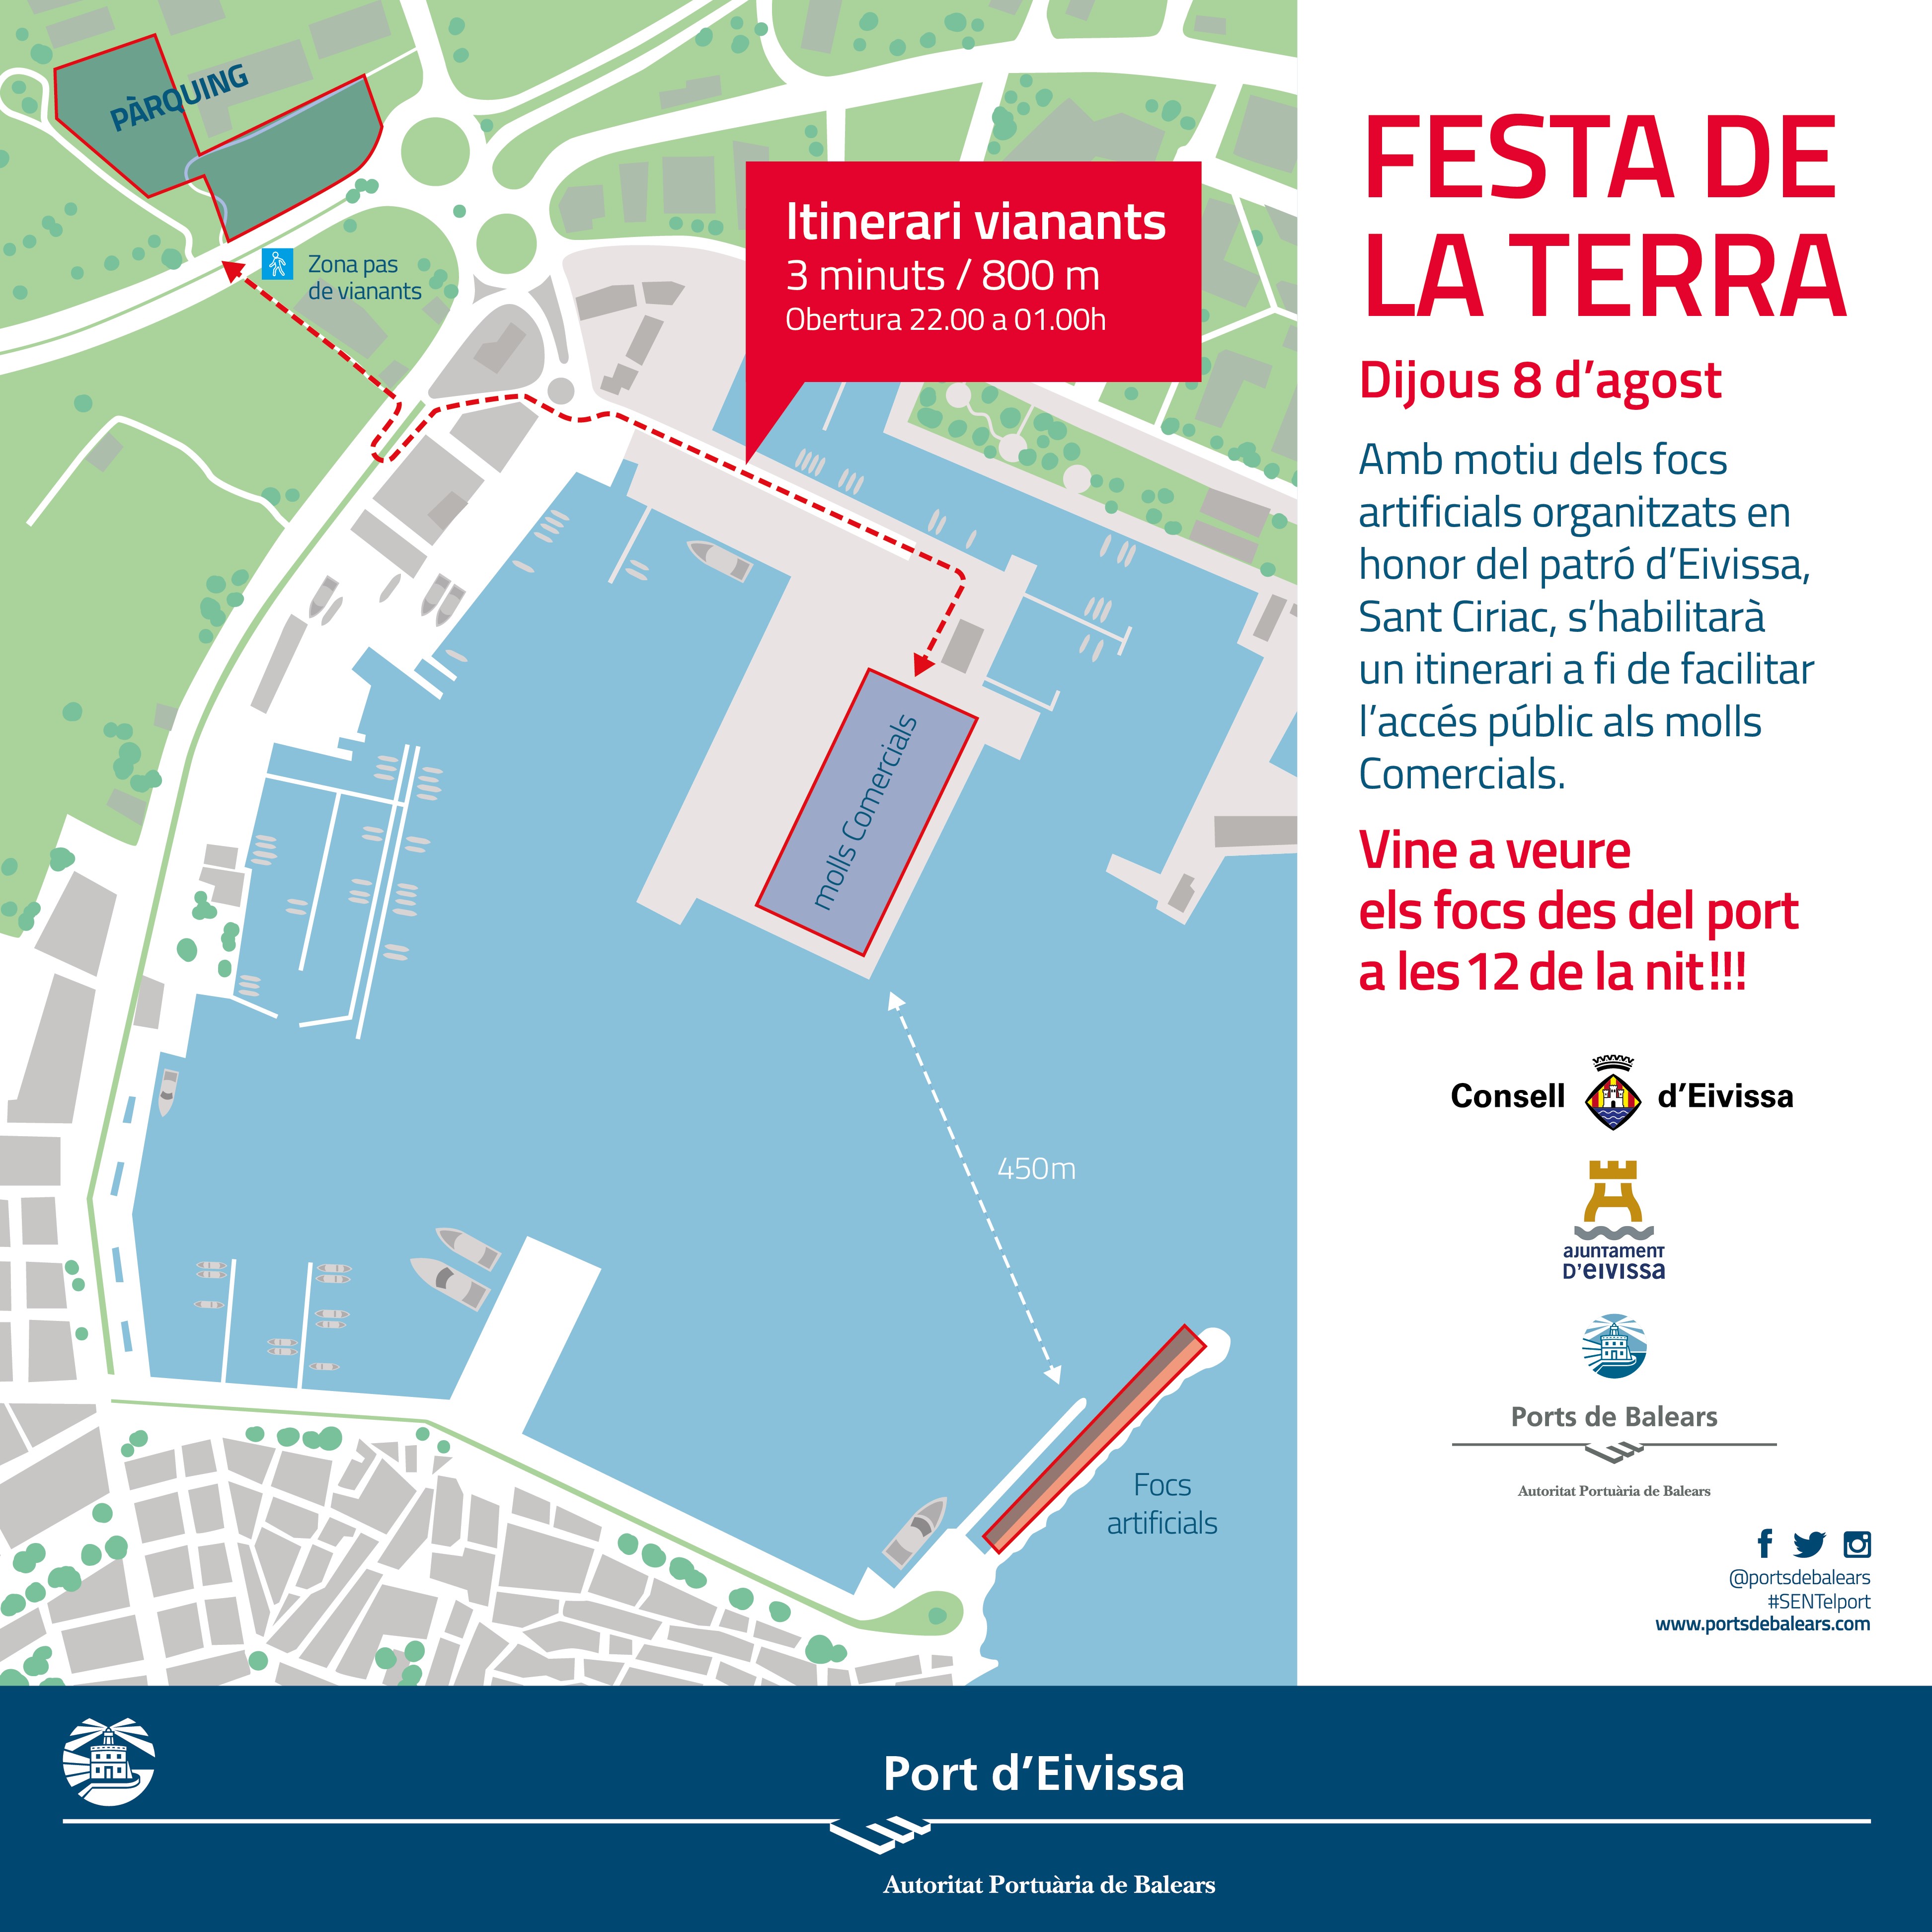 THE APB TO FACILITATE ACCESS TO THE COMMERCIAL QUAYS TO GIVE THE PUBLIC A BETTER VIEW OF THE FIREWORKS OF THE FESTA DE LA TERRA AT THE PORT OF IBIZA